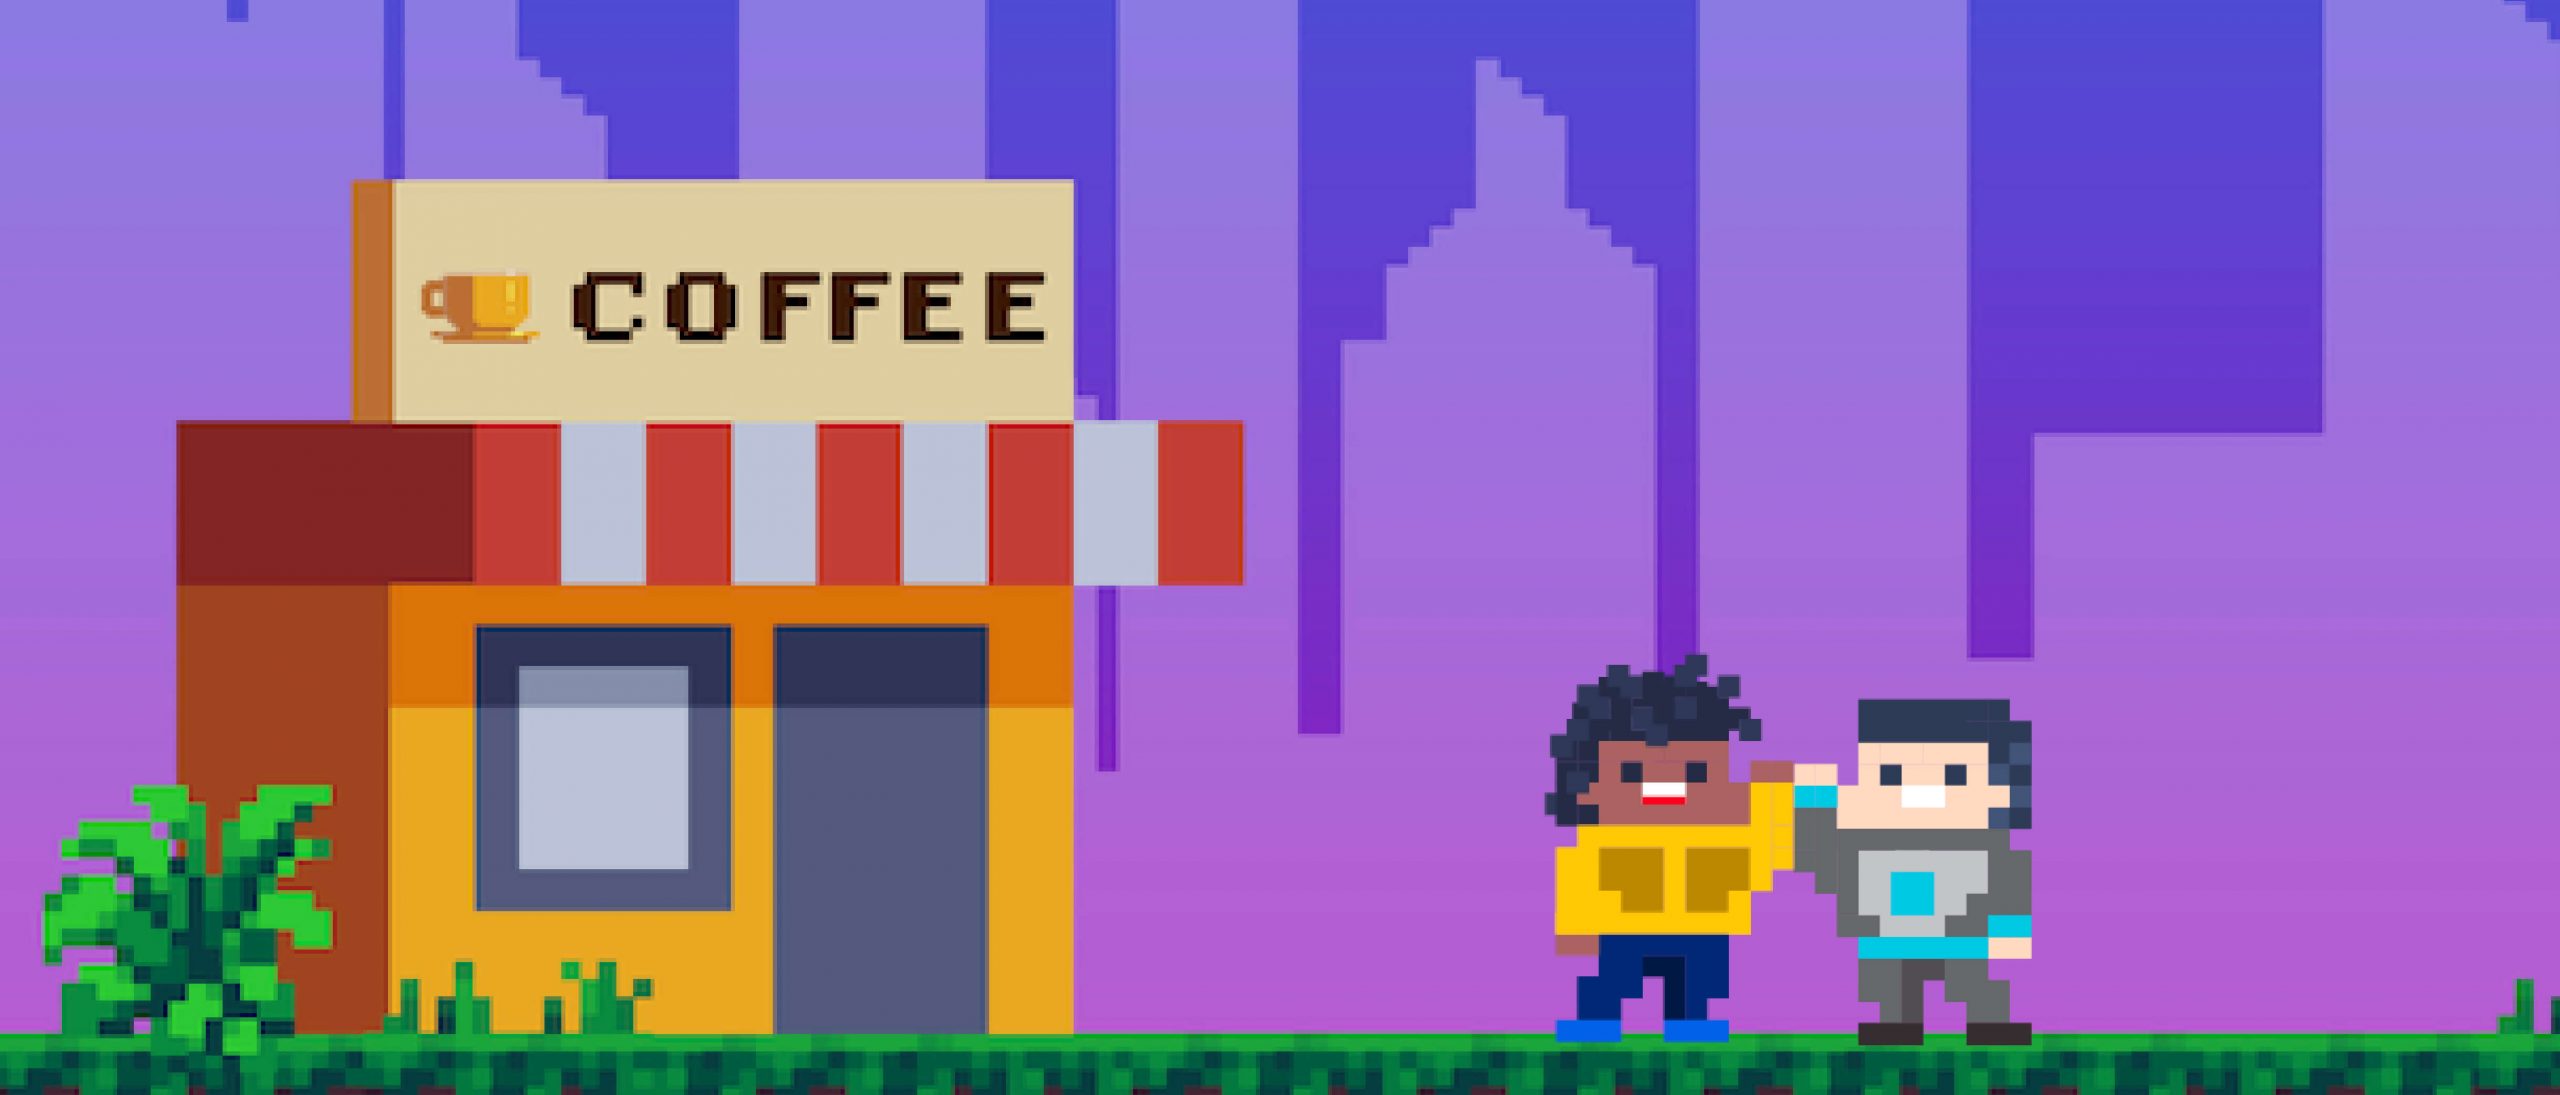 8-bit image of a man meeting his friend for coffee.